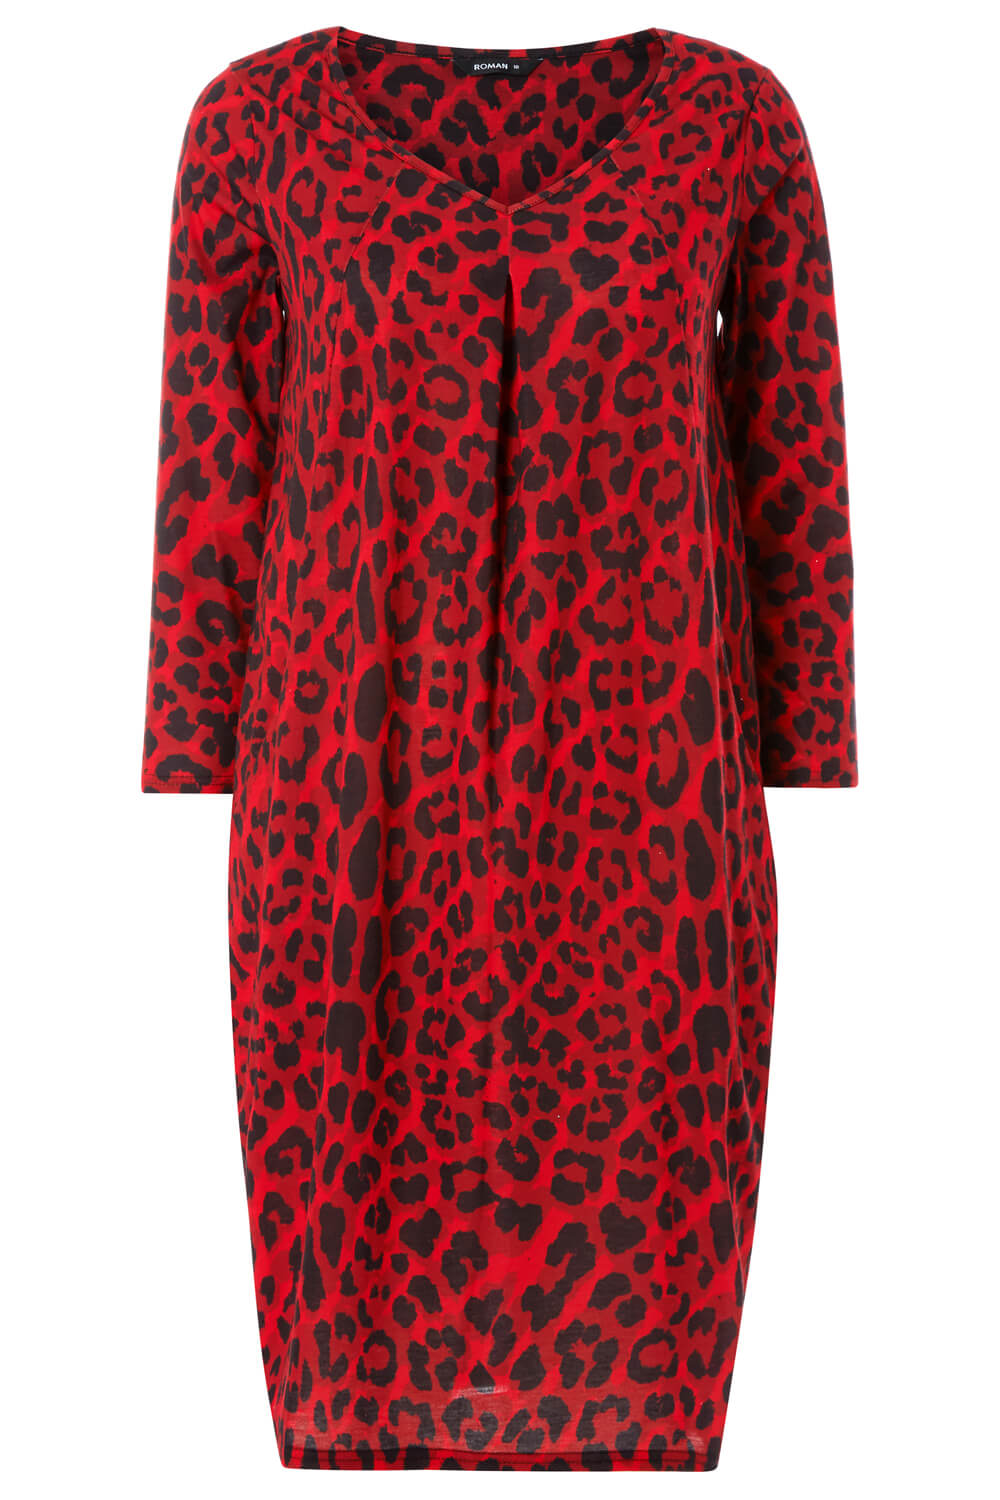 Red Animal Leopard Print Slouch Dress, Image 4 of 4